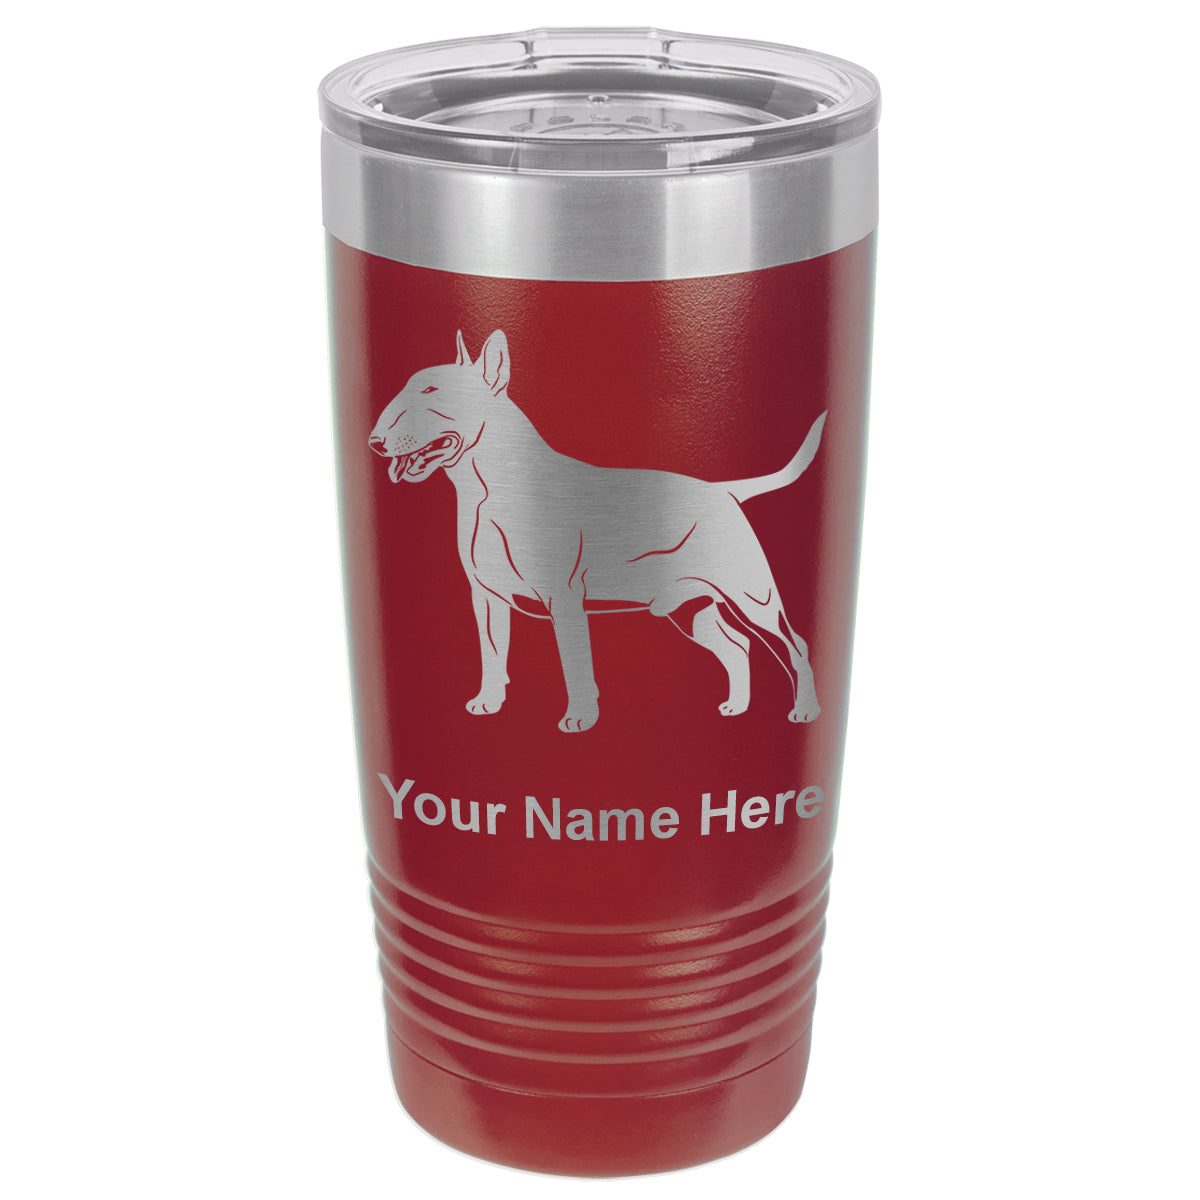 20oz Vacuum Insulated Tumbler Mug, Bull Terrier Dog, Personalized Engraving Included